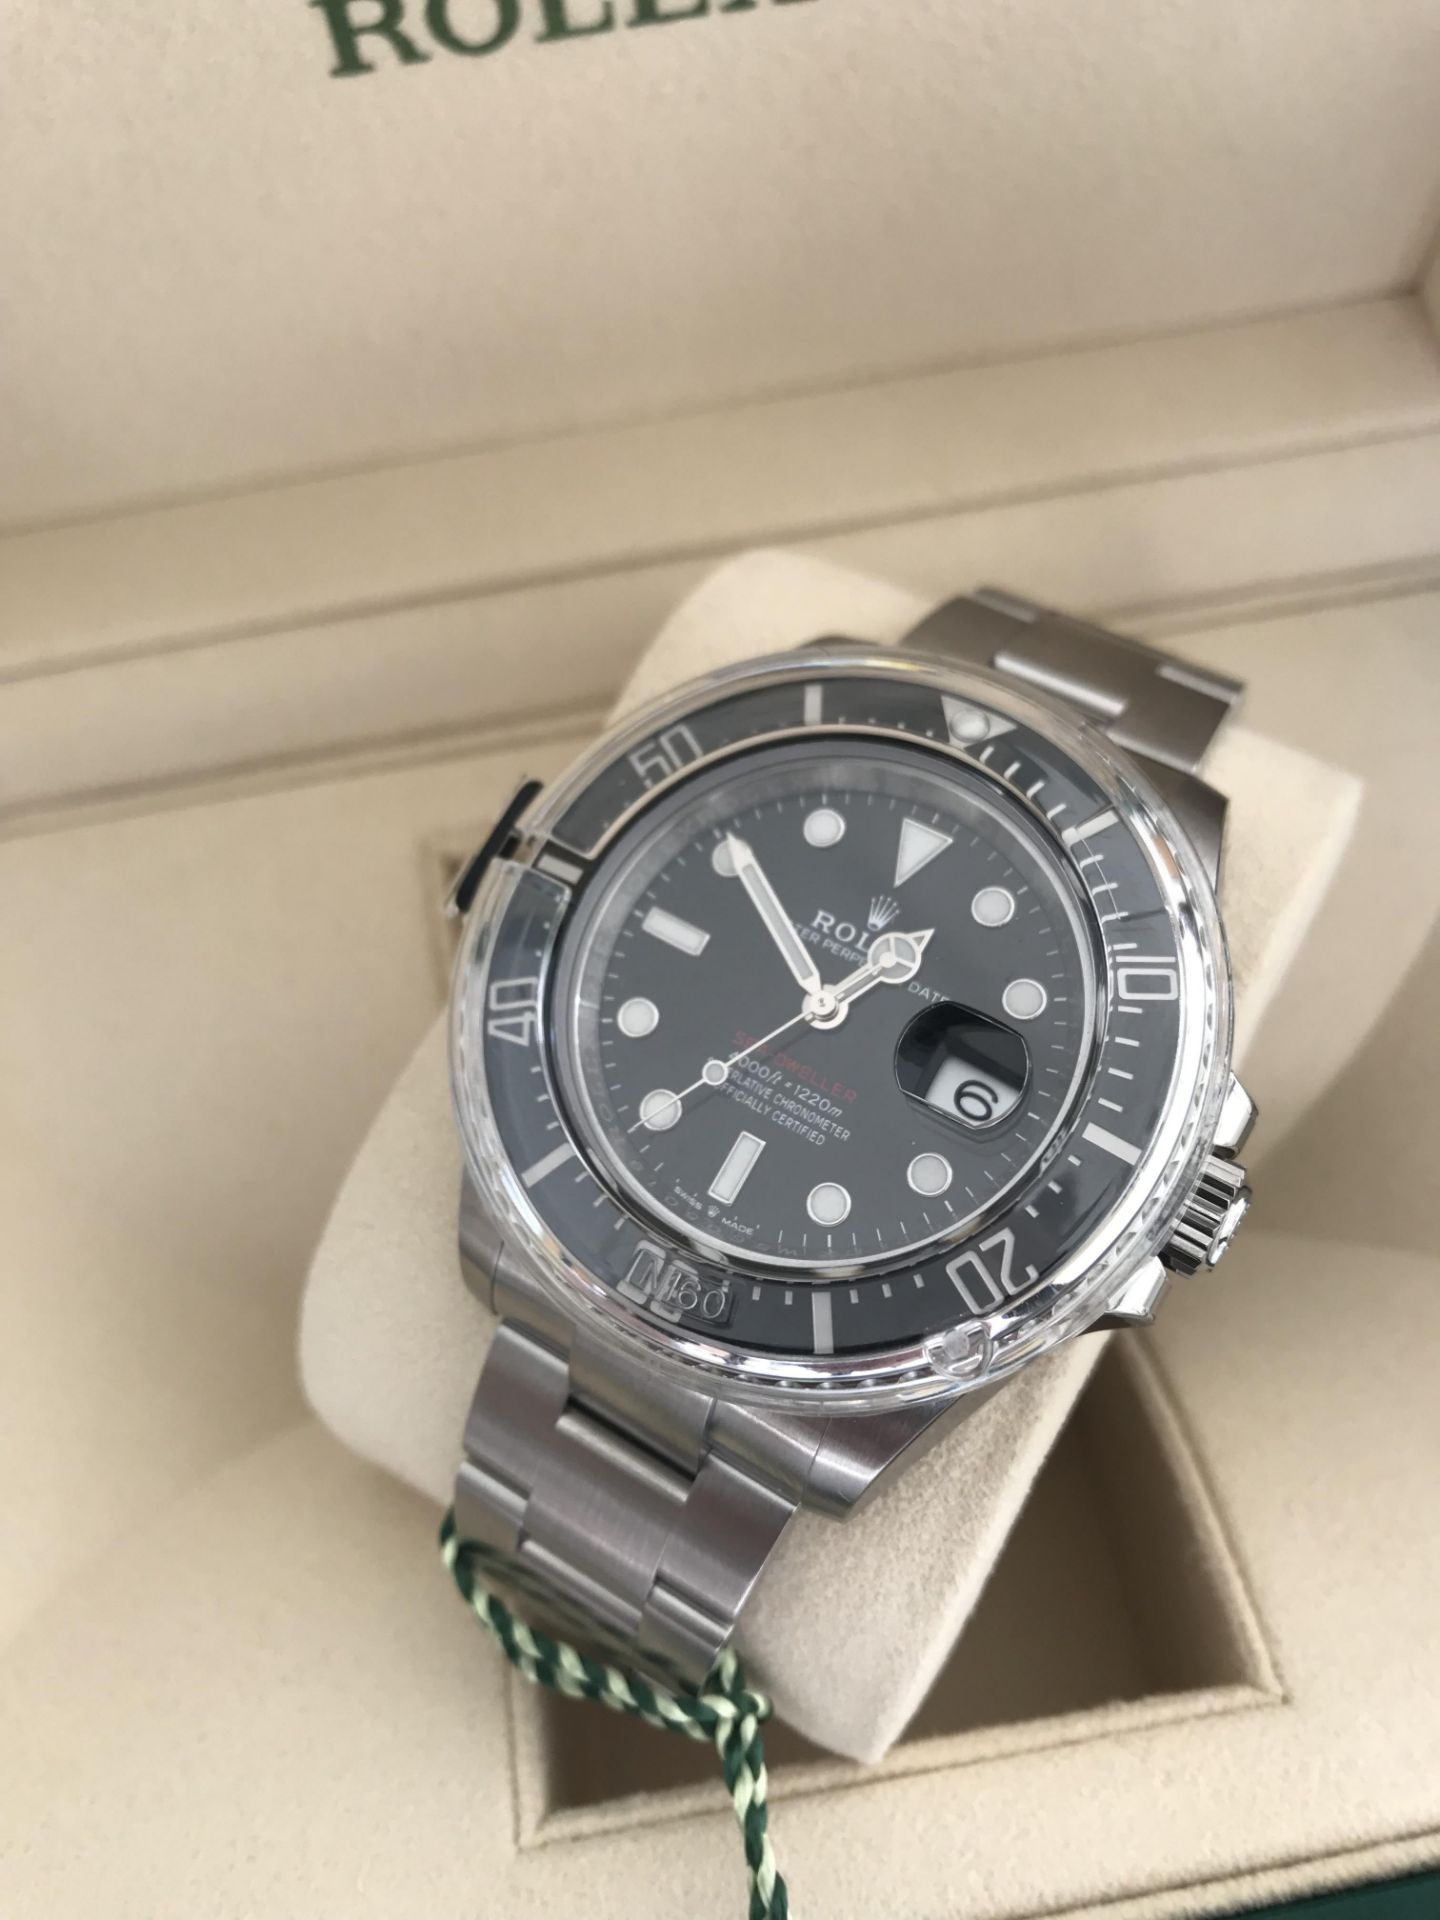 2020 ROLEX SEA-DWELLER 43 MM OYSTER STEEL WATCH 126600 50TH ANNIVERSARY - Image 5 of 15